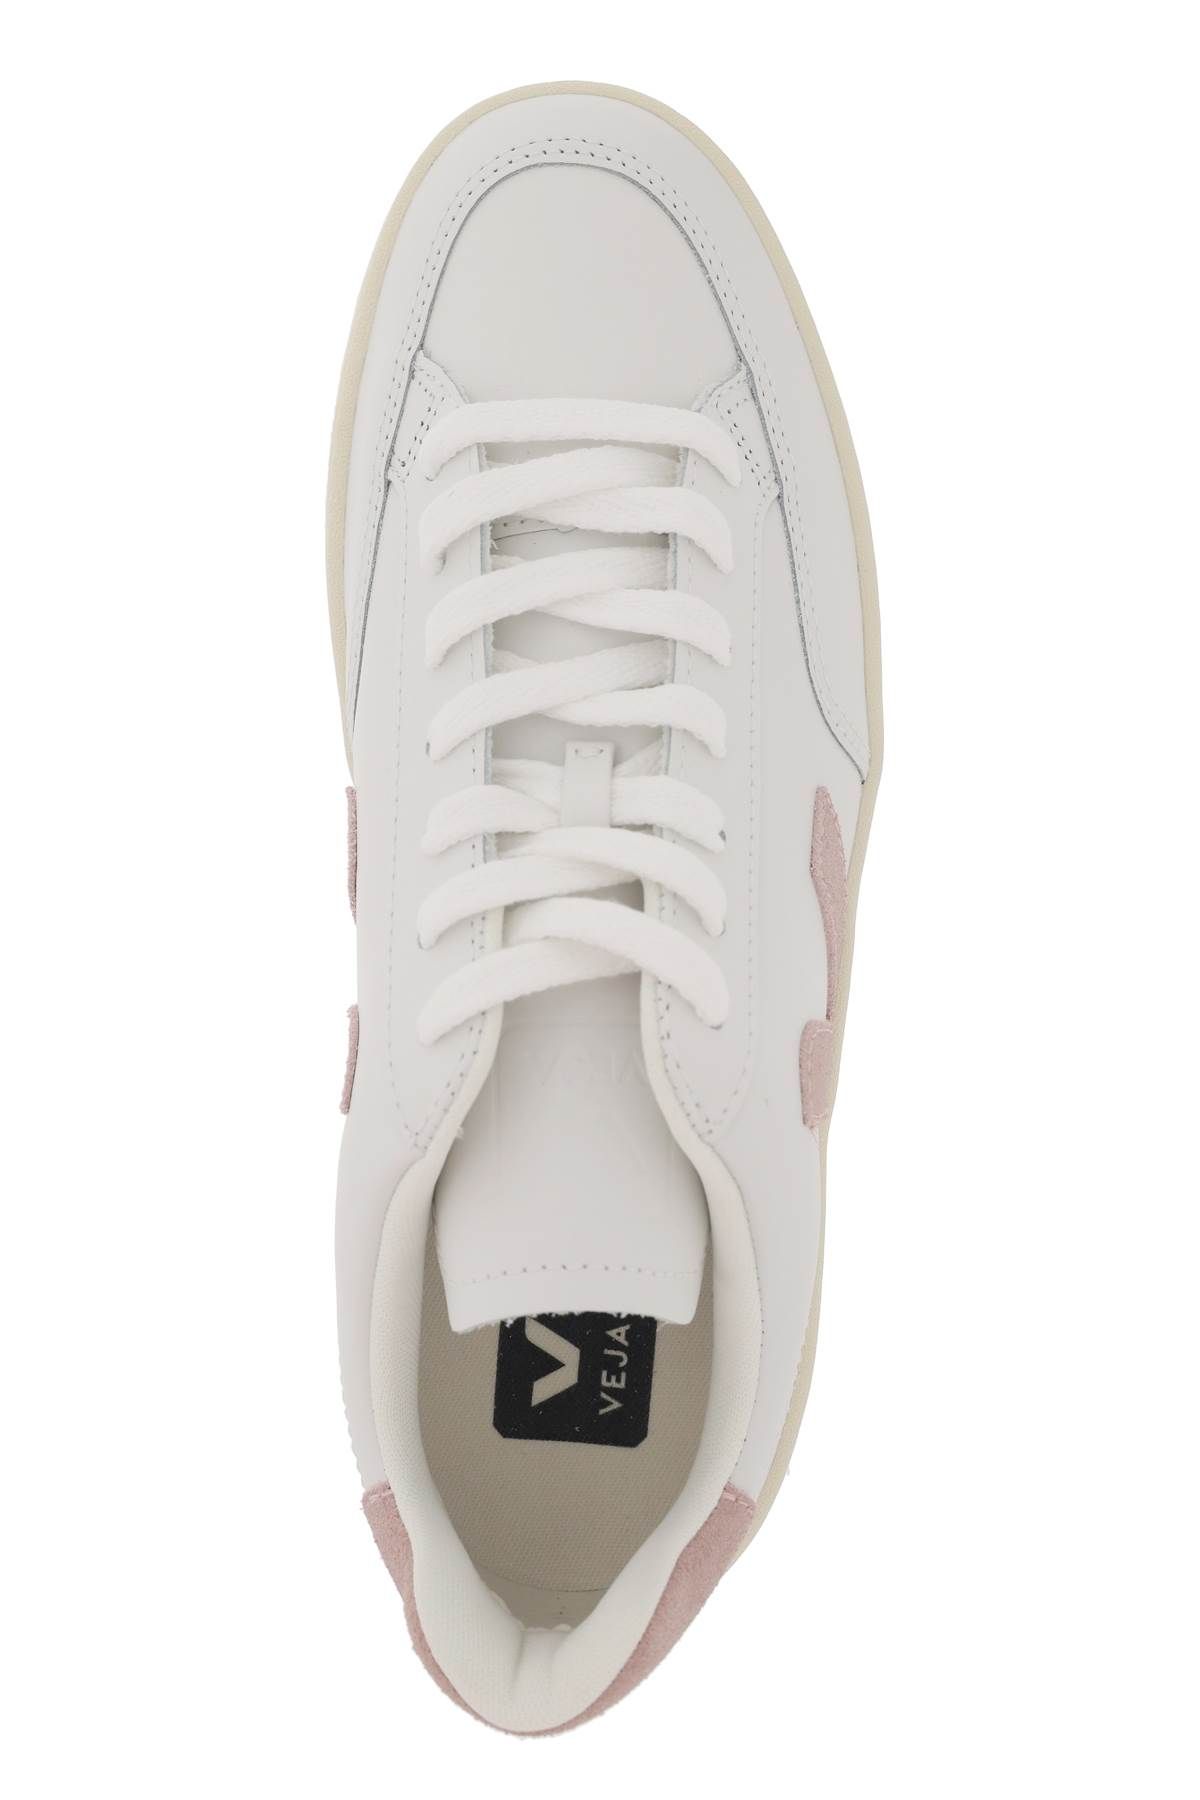 Shop Veja Leather V-12 Sneakers In White,pink